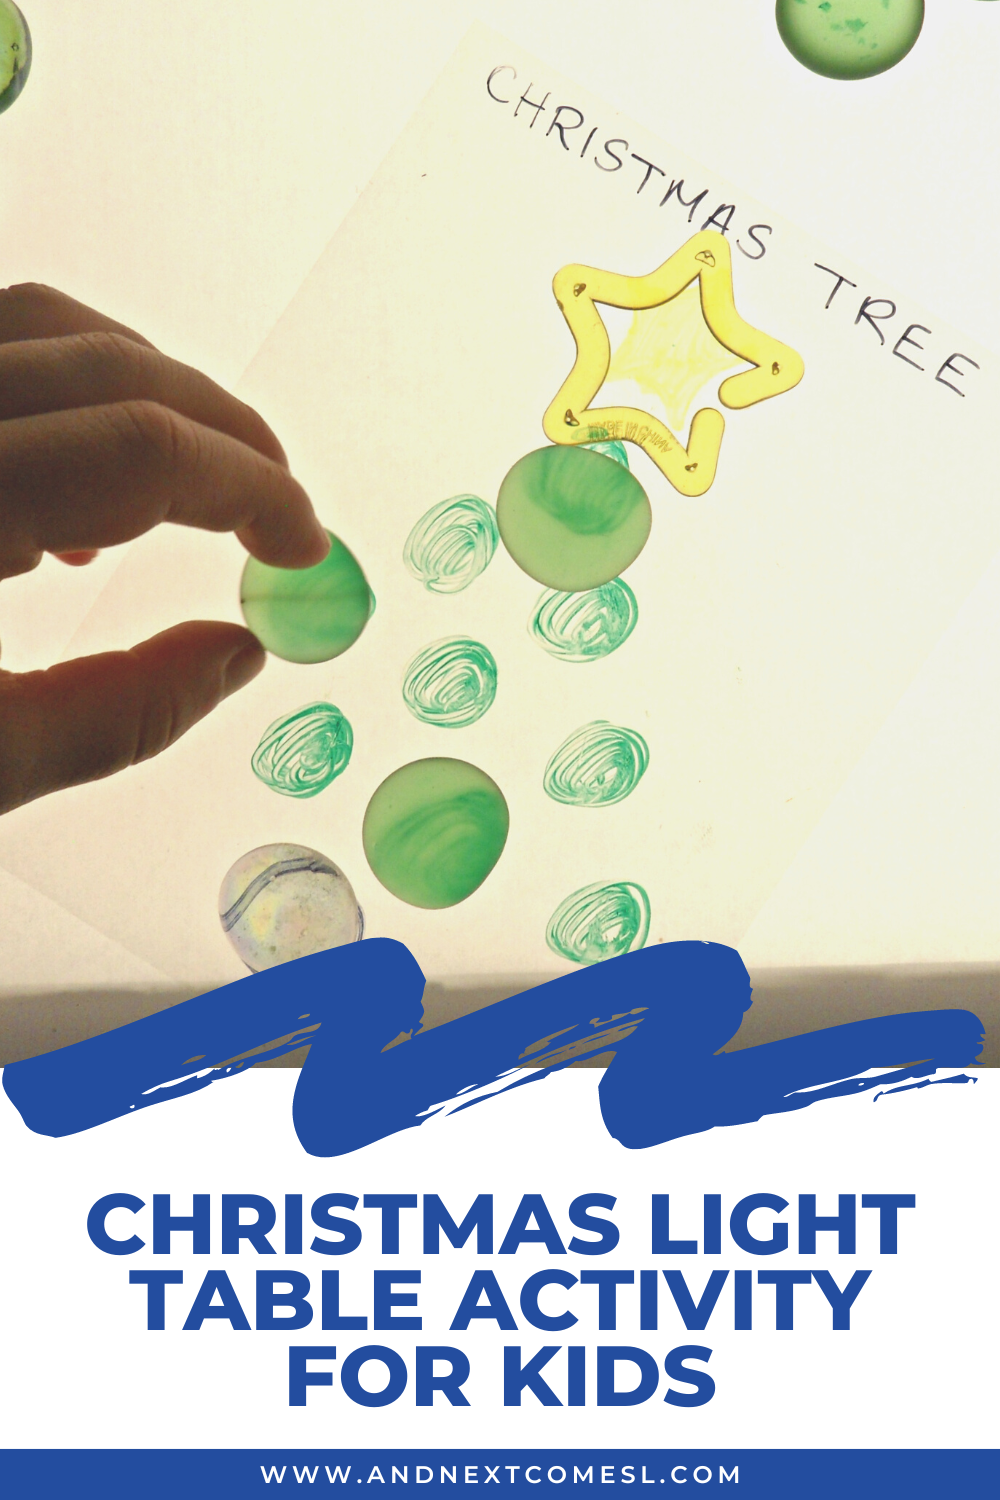 Simple Christmas light table activity for toddlers and preschoolers that works on color matching